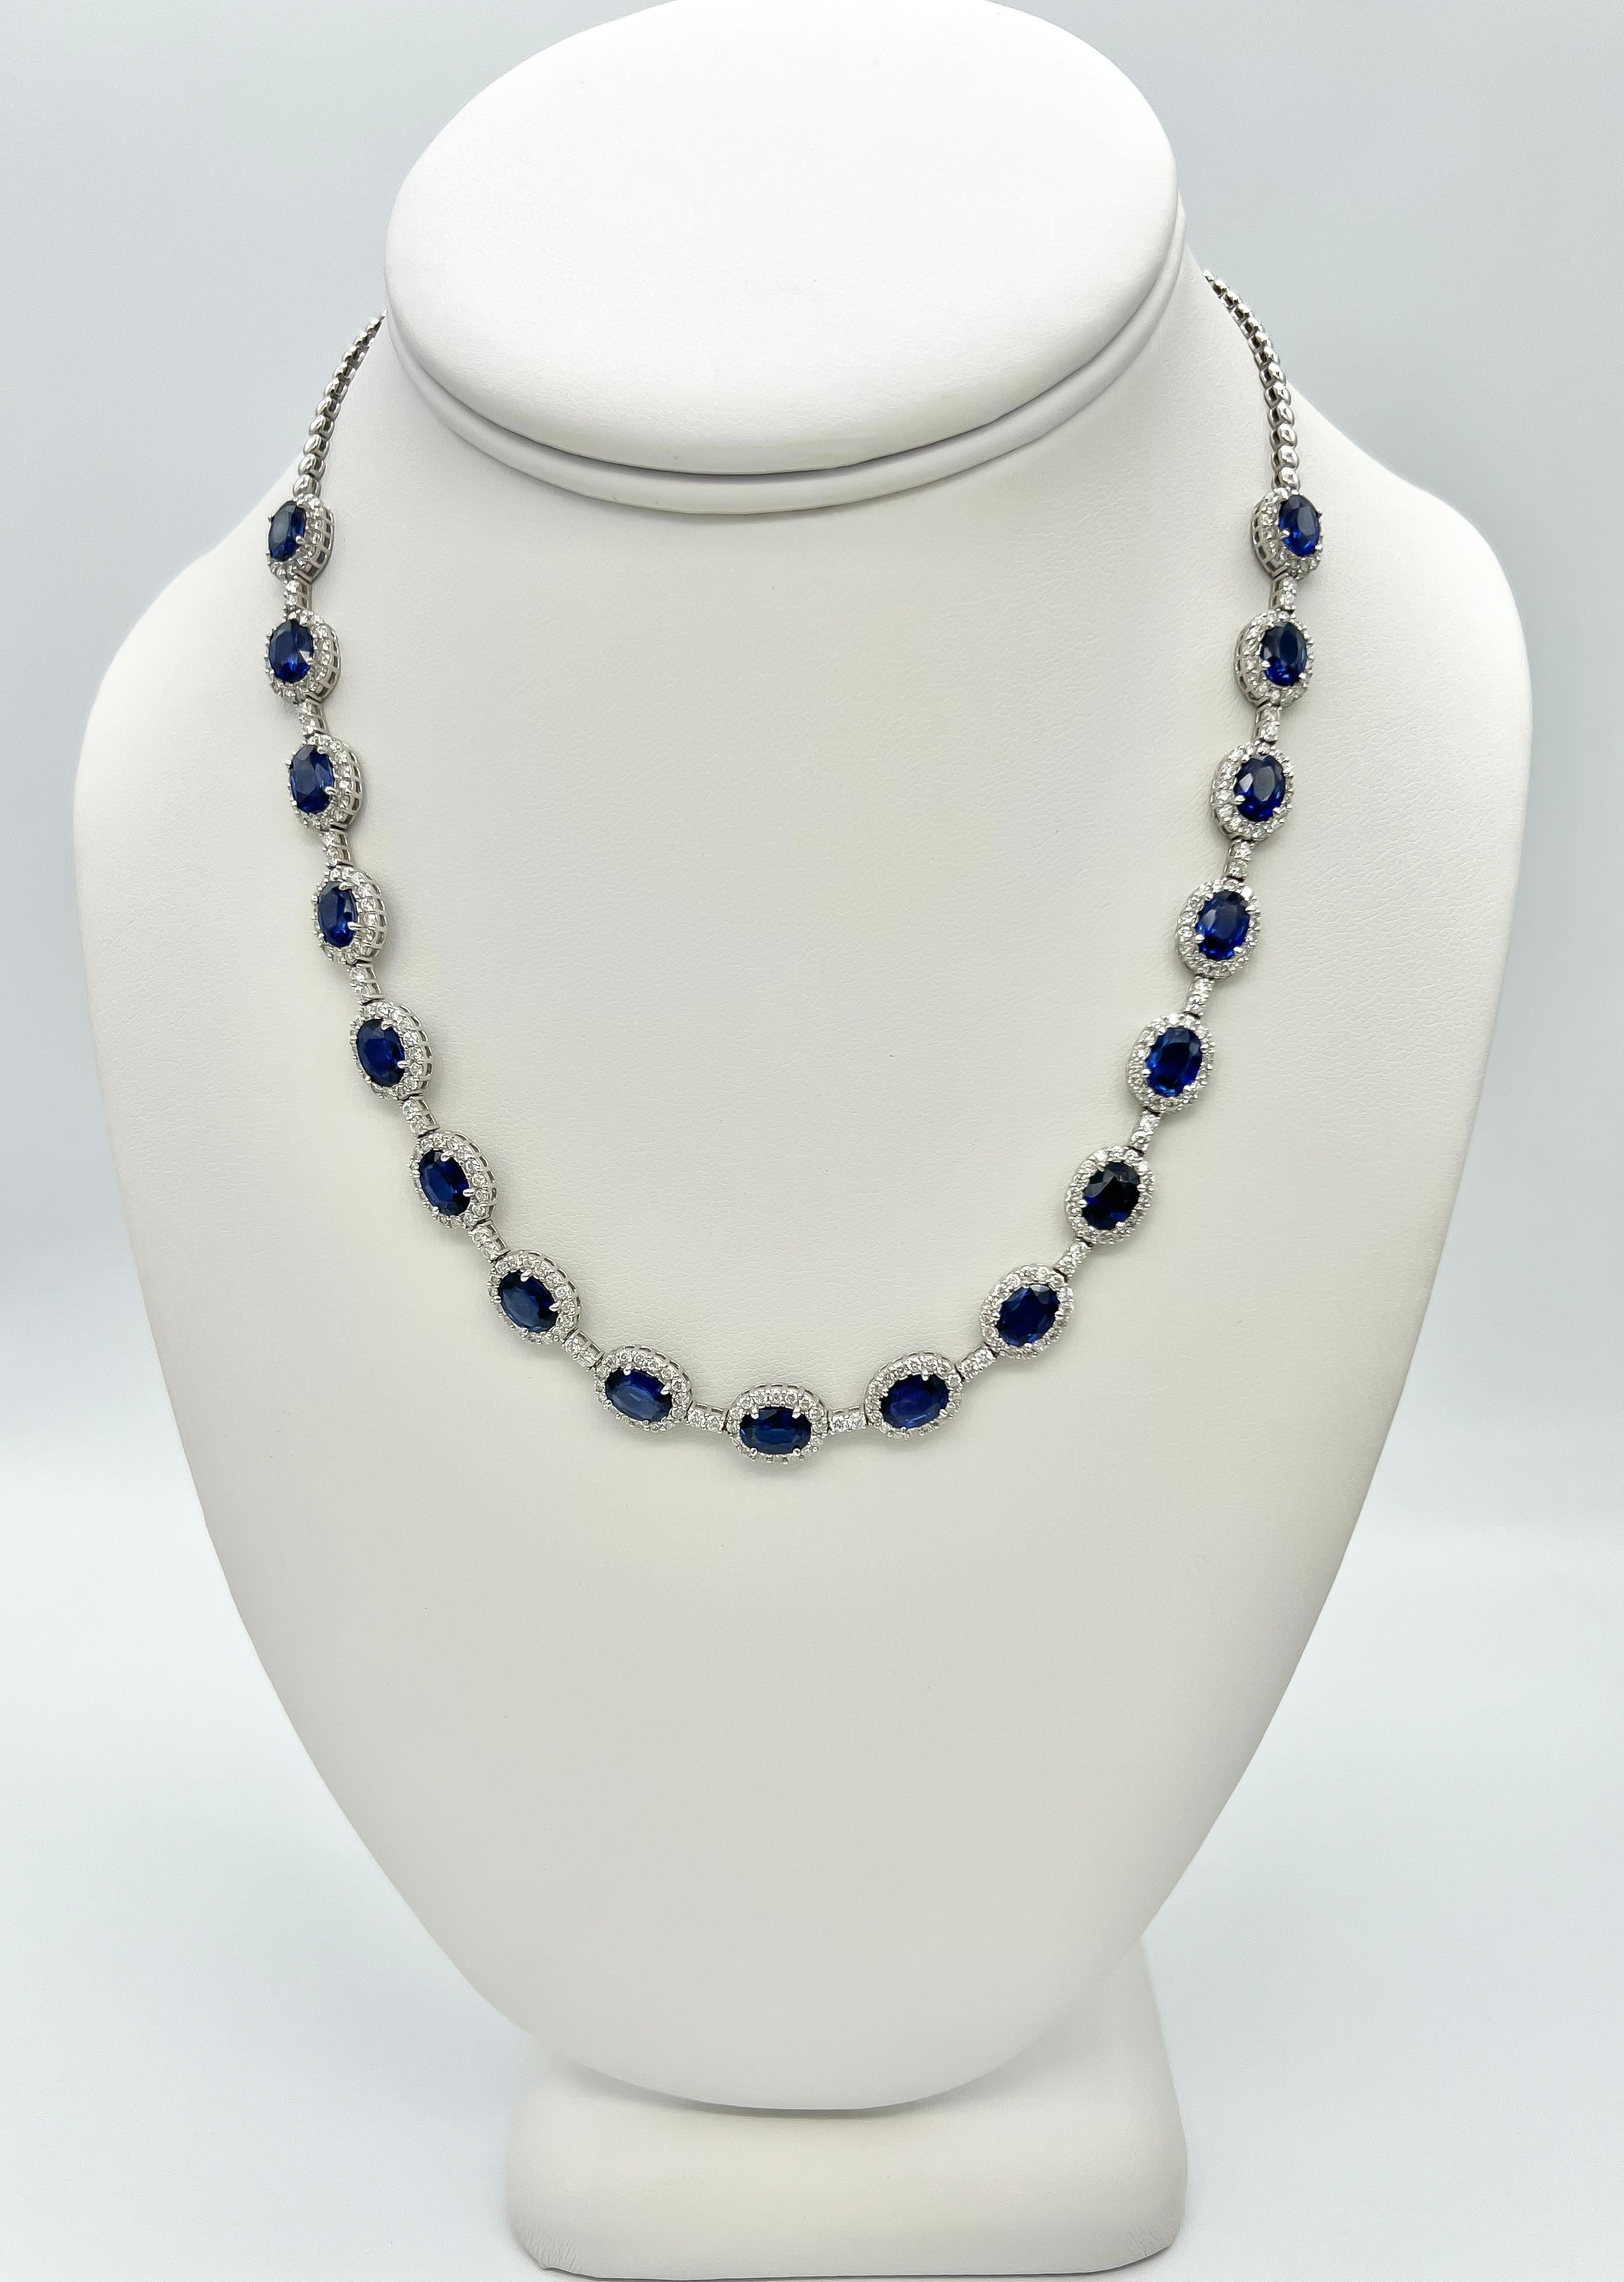 18.06 Total Carat Statement Sapphire and Diamond, White Gold Necklace

Necklace worthy of royalty, designed to dazzle. The bigger sizes of the sapphires has a Victorian look which is smooth and elegant yet sophisticated and regal. Each oval cut